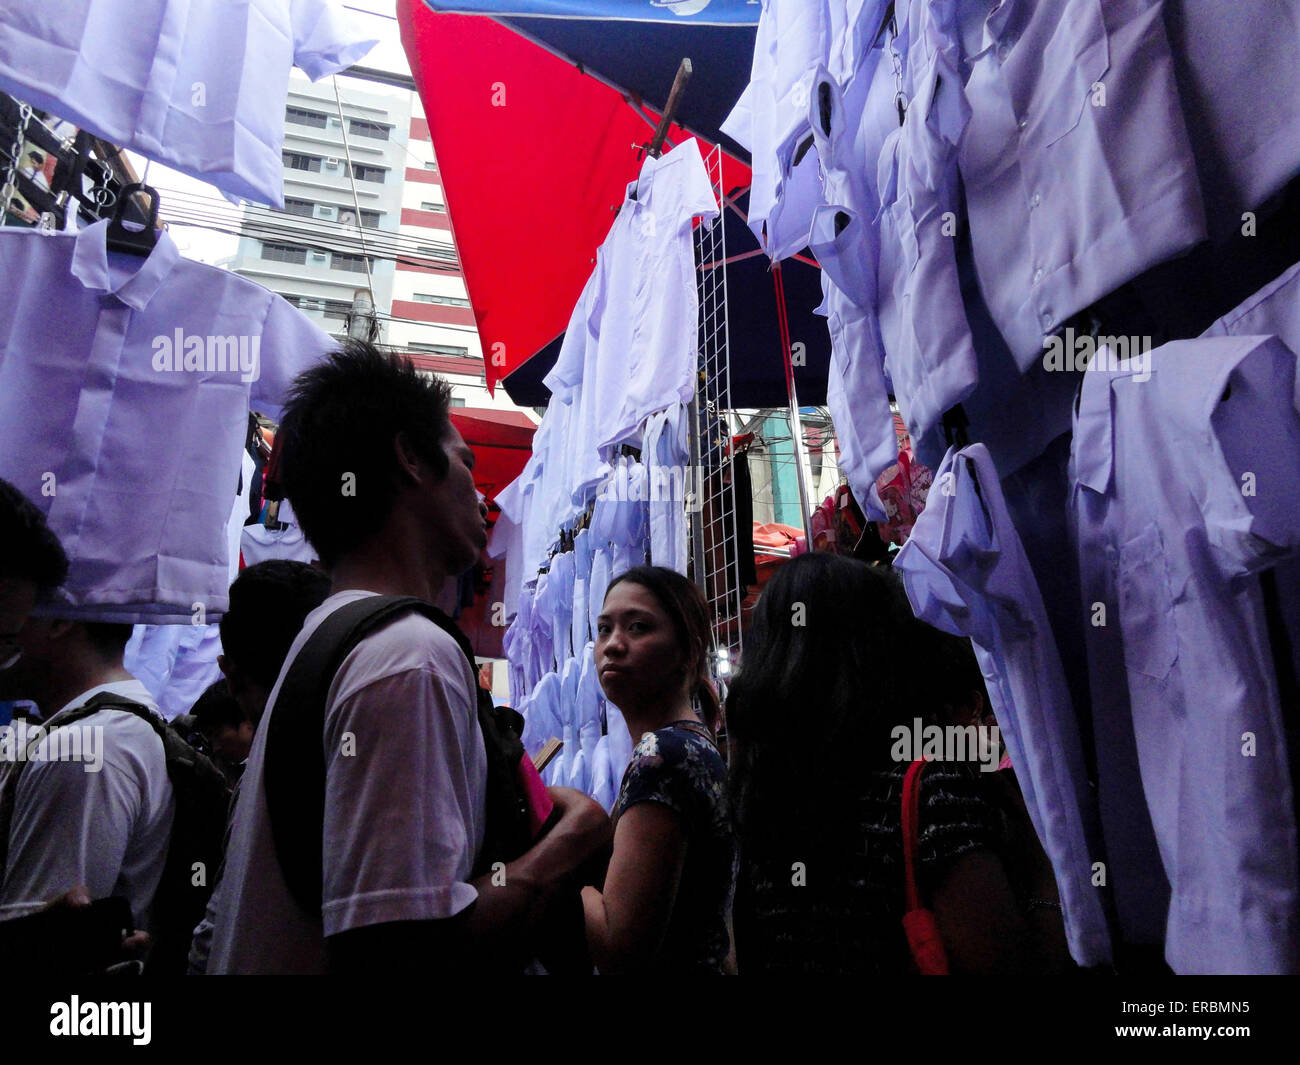 Manila, Philippines. 31st May, 2015. Shoppers pass by school uniforms being sold by vendors in Divisoria Market. Demand for school supplies has increased as the first day of school nears, which starts on June 1, 2015. © Richard James Mendoza/Pacific Press/Alamy Live News Stock Photo